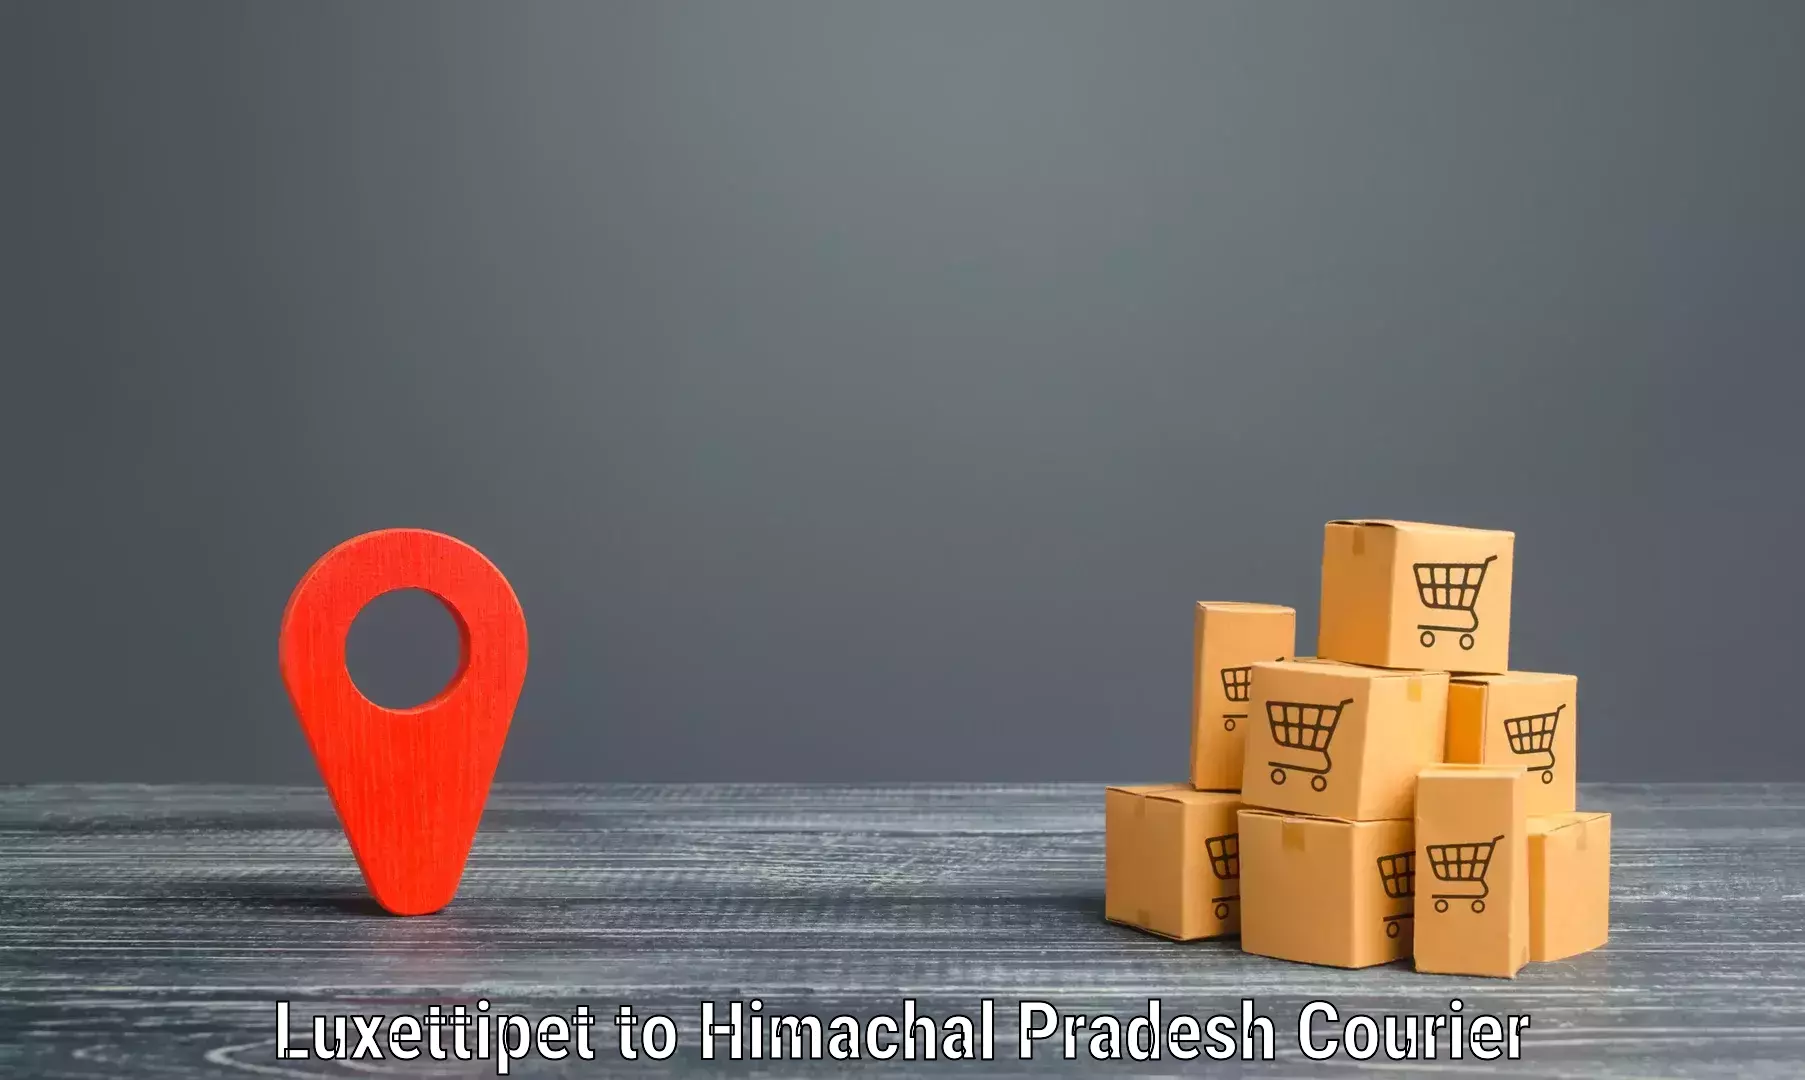 Courier service partnerships Luxettipet to Dharamshala